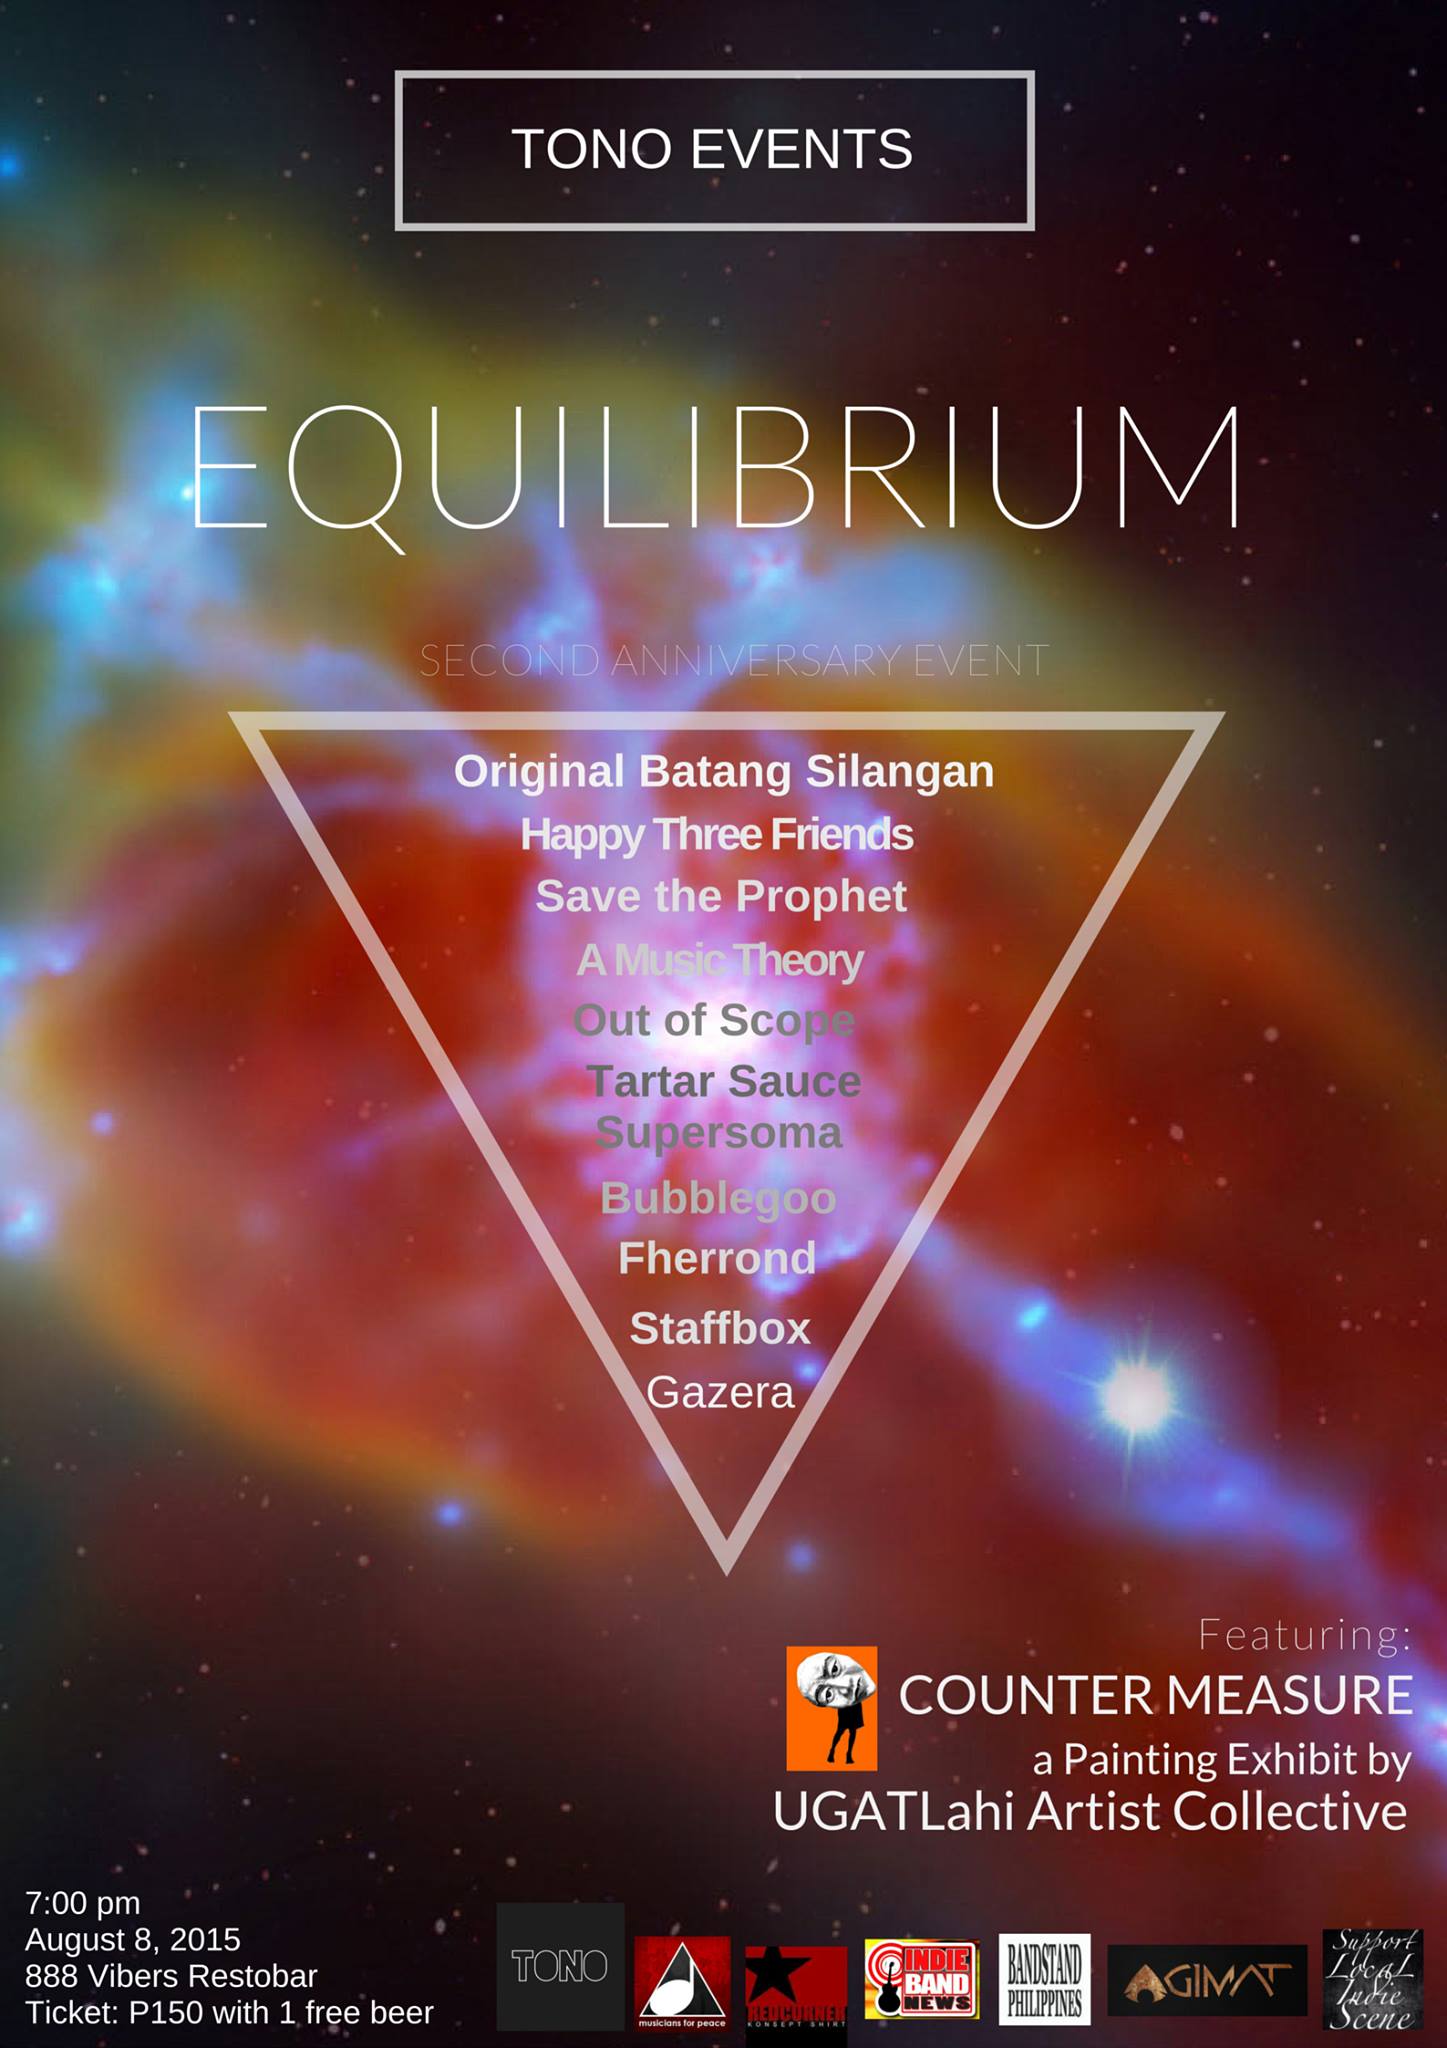 EQUILIBRIUM: Tono Events Second Anniversary     Saturday, August 8     at 7:00pm - 1:00am     Aug 8 at 7:00pm to Aug 9 at 1:00am     	     Show Map     888 Vibers Bar & Resto     Leveriza Street, Pasay City, Philippines     	     Invited by Zalyn Lagan We are turning two and you are invited! On August 8, 2015, join us at 888 Vibers Restobar, Pasay City, as we celebrate true artistry! With a one-time only painting exhibit from the UGATLahi Artist Collective entitled: Counter Measure. Featuring: Fherrond A Music Theory Save the Prophet Bubblegoo Out of Scope Staffbox Gazera Tartar Sauce Original Batang Silangan Happy Three Friends Supersoma Kick! Get in for only P150 and get one free beer! Bring your friends, and see you all! :) Special thanks to UGATLahi Artist Collective and to all the social media pages who promote our events. Thank you, Musicians for Peace Phils. for your support! Redcorner Indie Band News Bandstand Philippines Agimat: Sining at Kulturang Pinoy Support Your Local Indie Scene